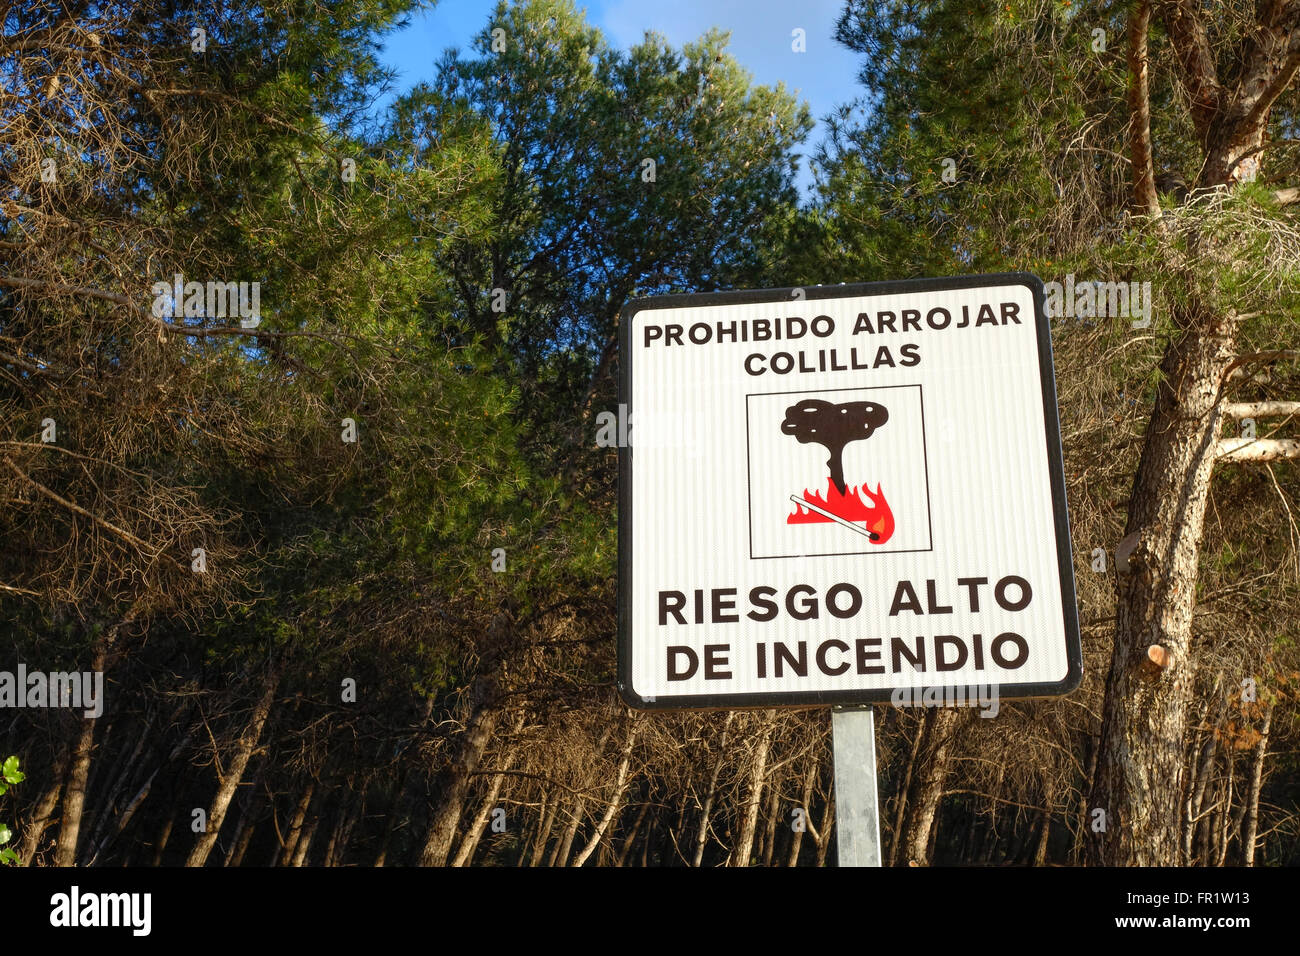 Spanish warning sign, for forest fires, Don't throw burning cigarettes in forest, high risk fro fire. Spanish. Andalusia, Spain Stock Photo